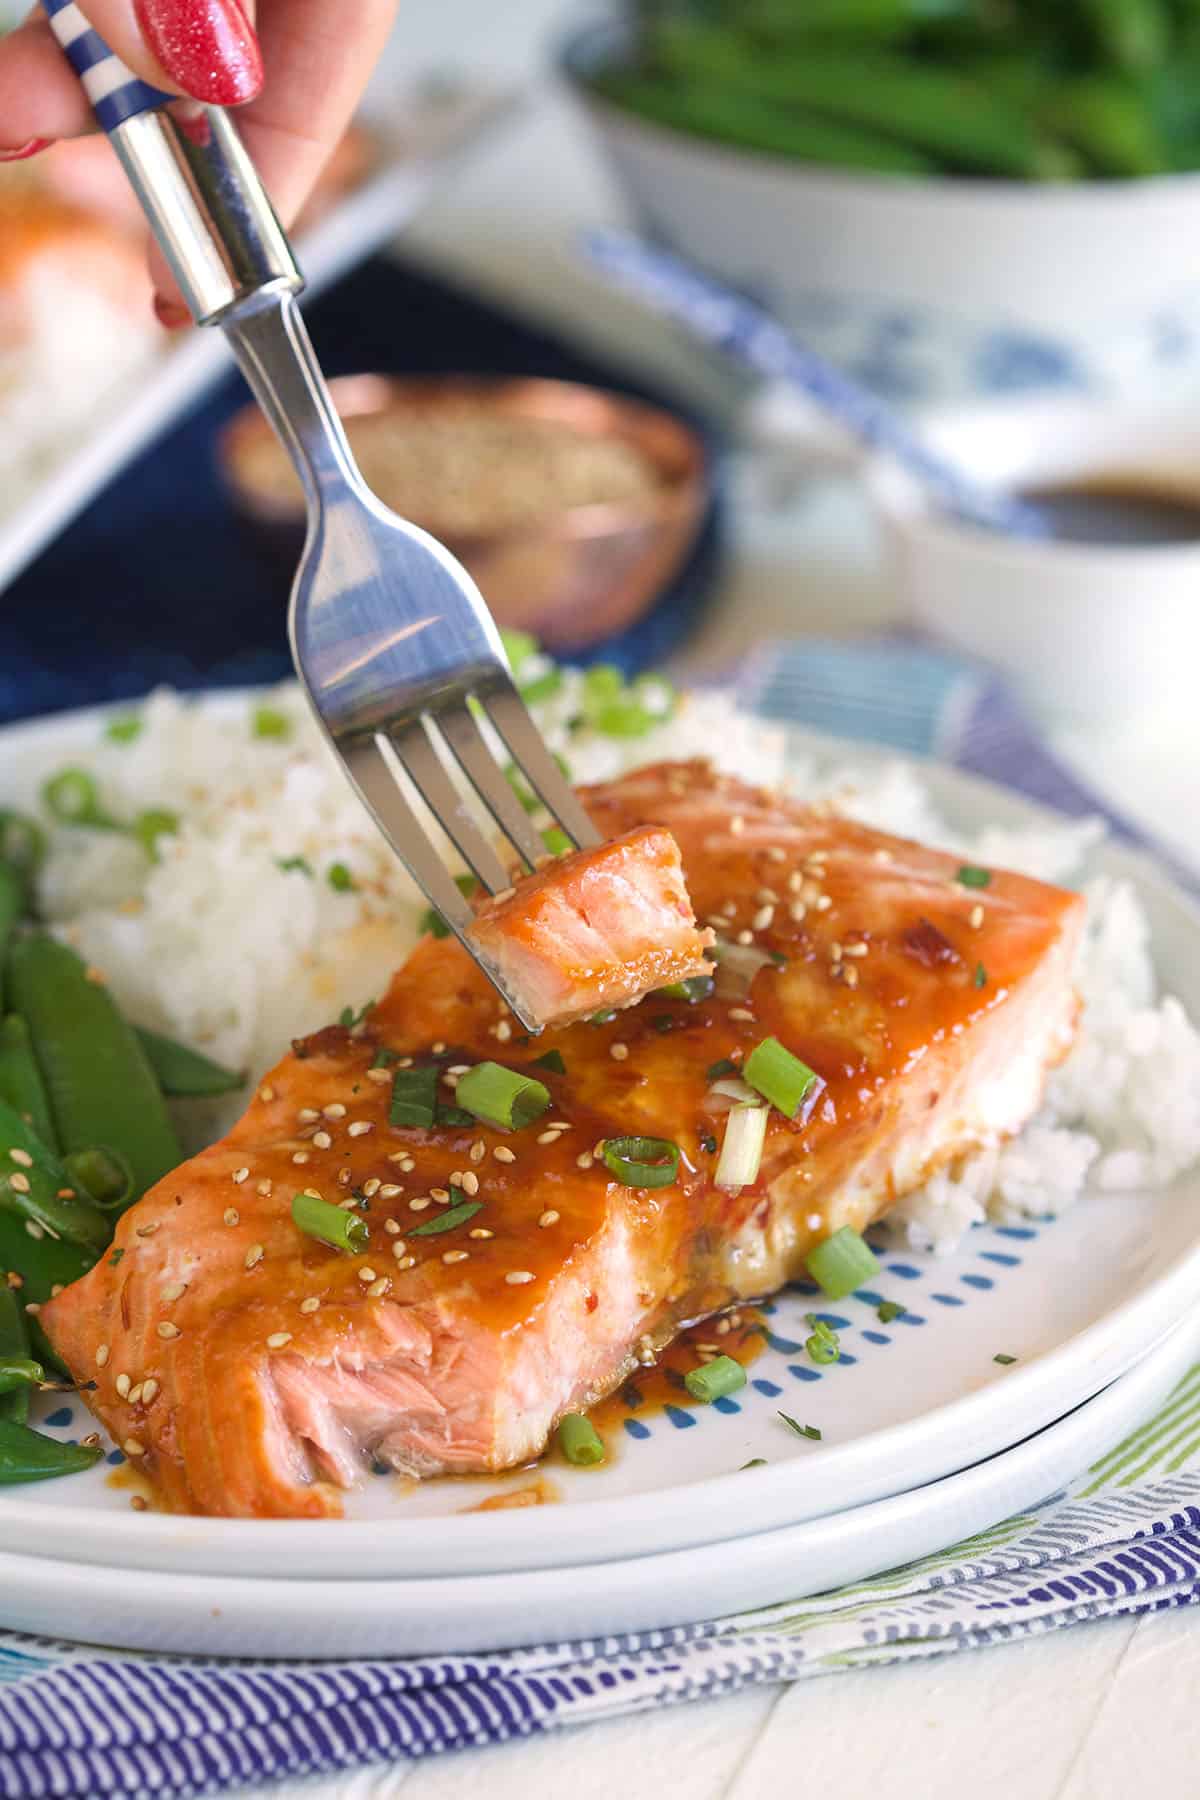 A bite sized portion of salmon is being lifted from the plate by a fork.